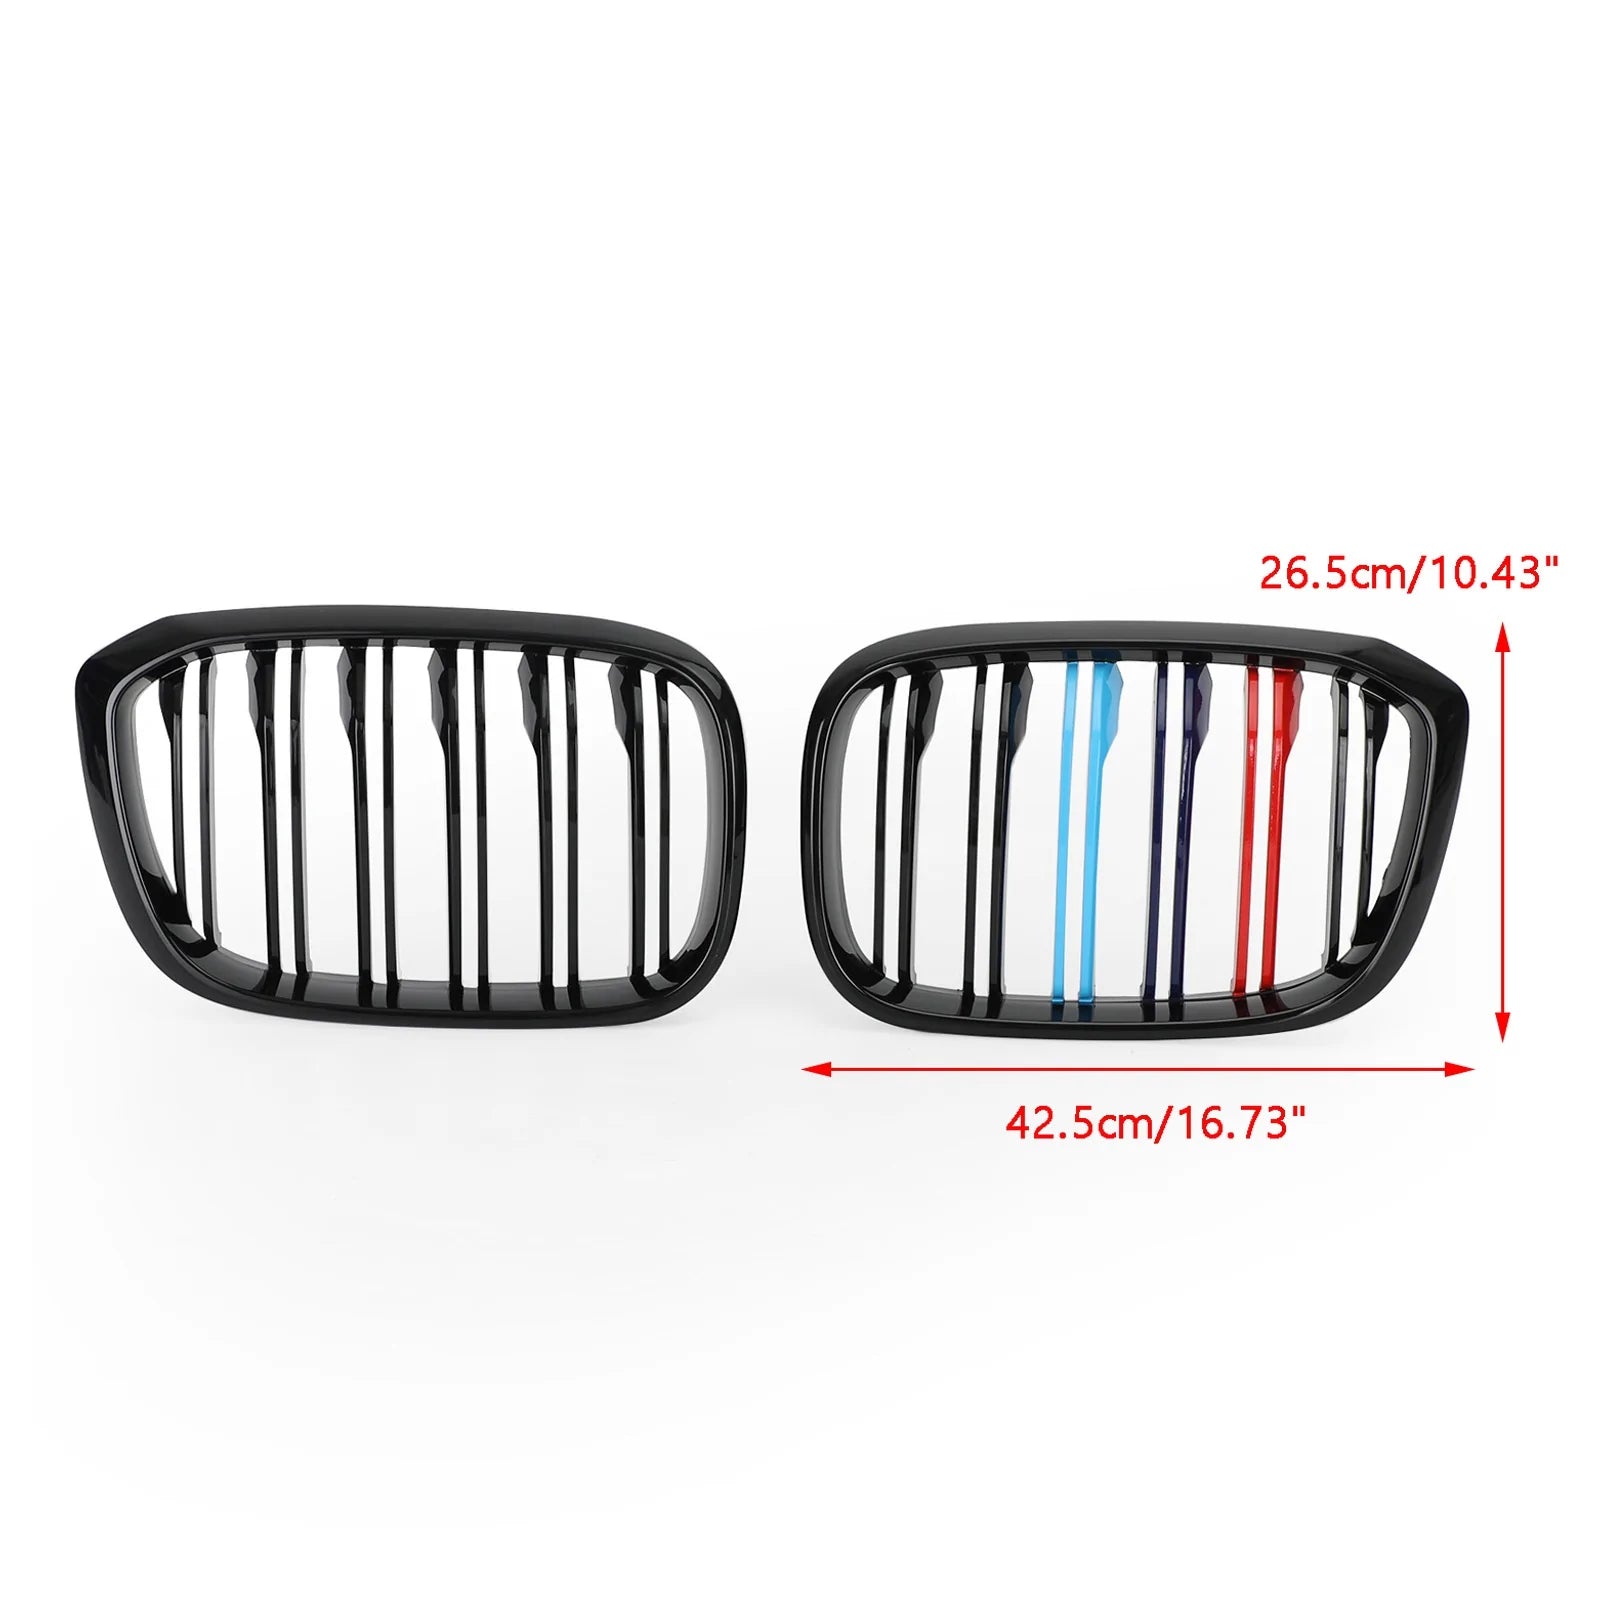 2PCS M-Color Kidney Grill Grille 51138469959 fit BMW G01 X3 G02 X4 Gloss Black Generic